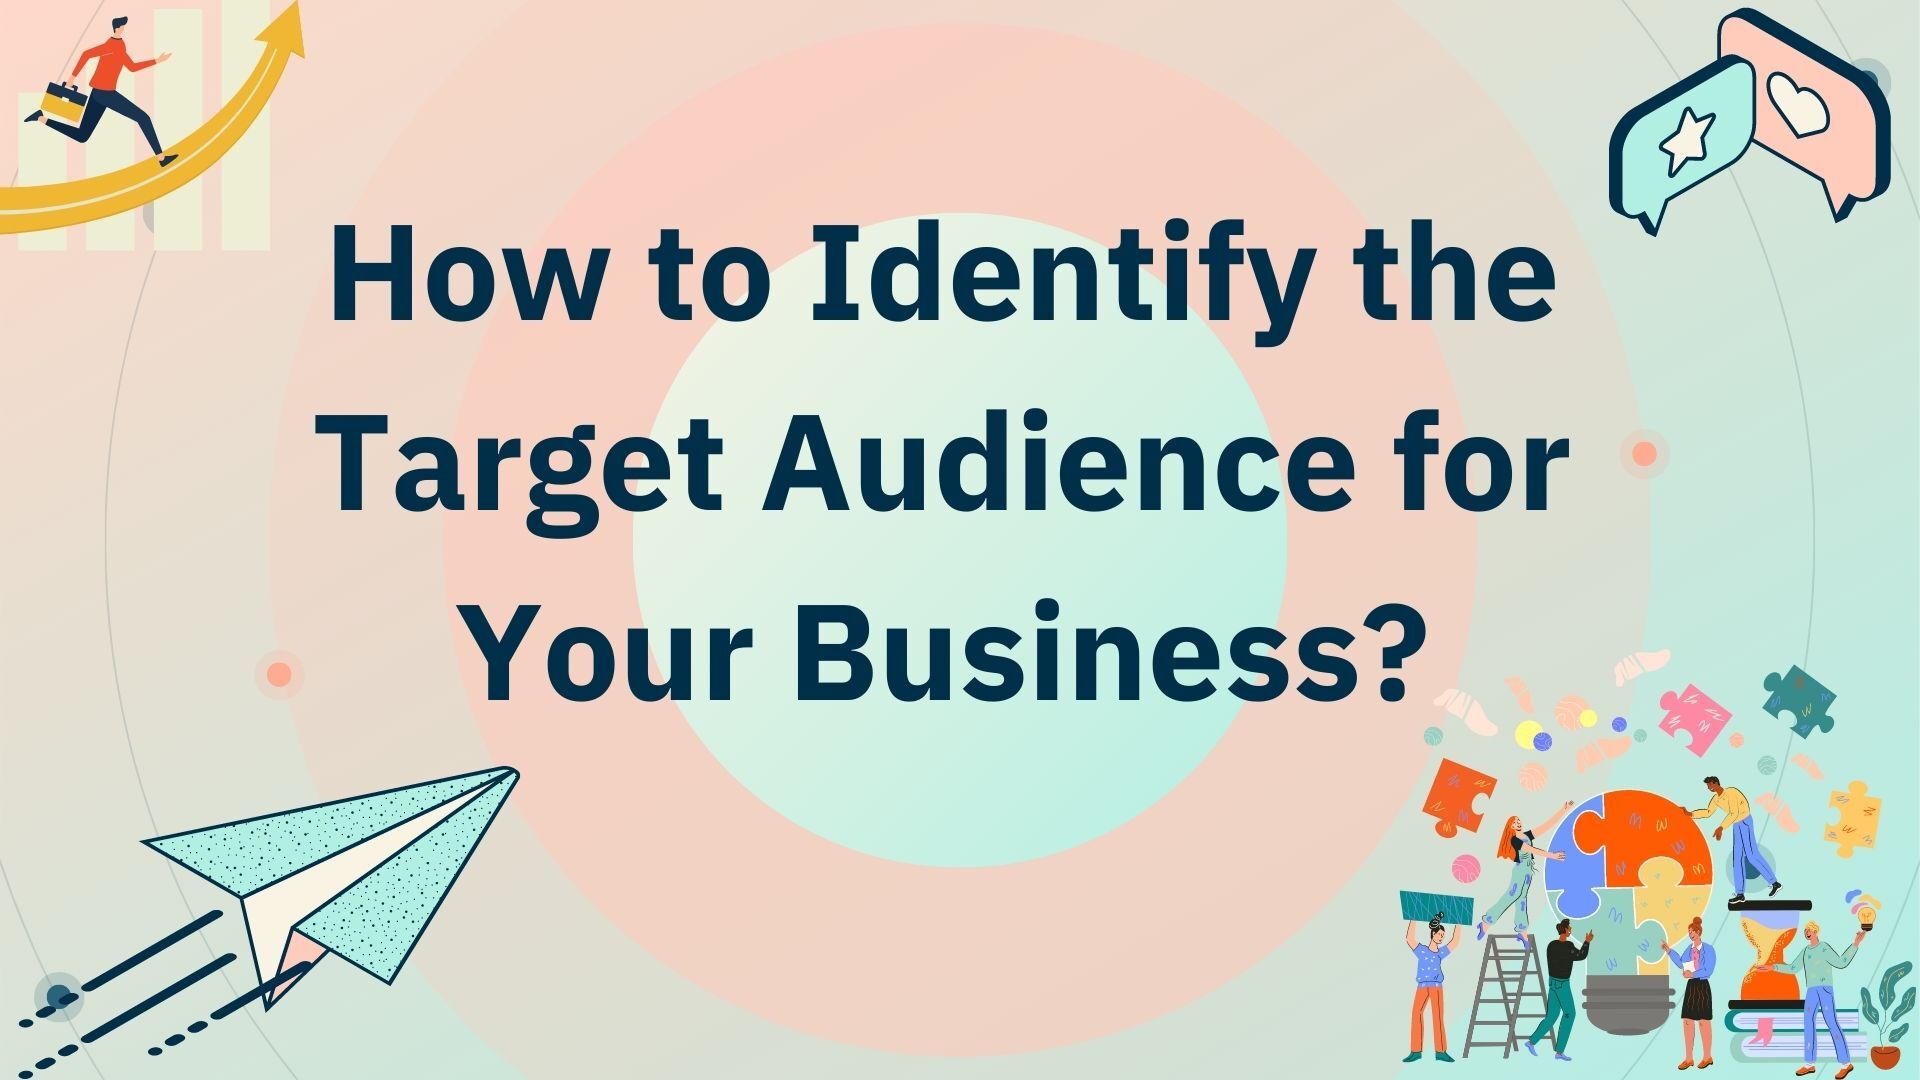 How to Identify the Target Audience for Your Business